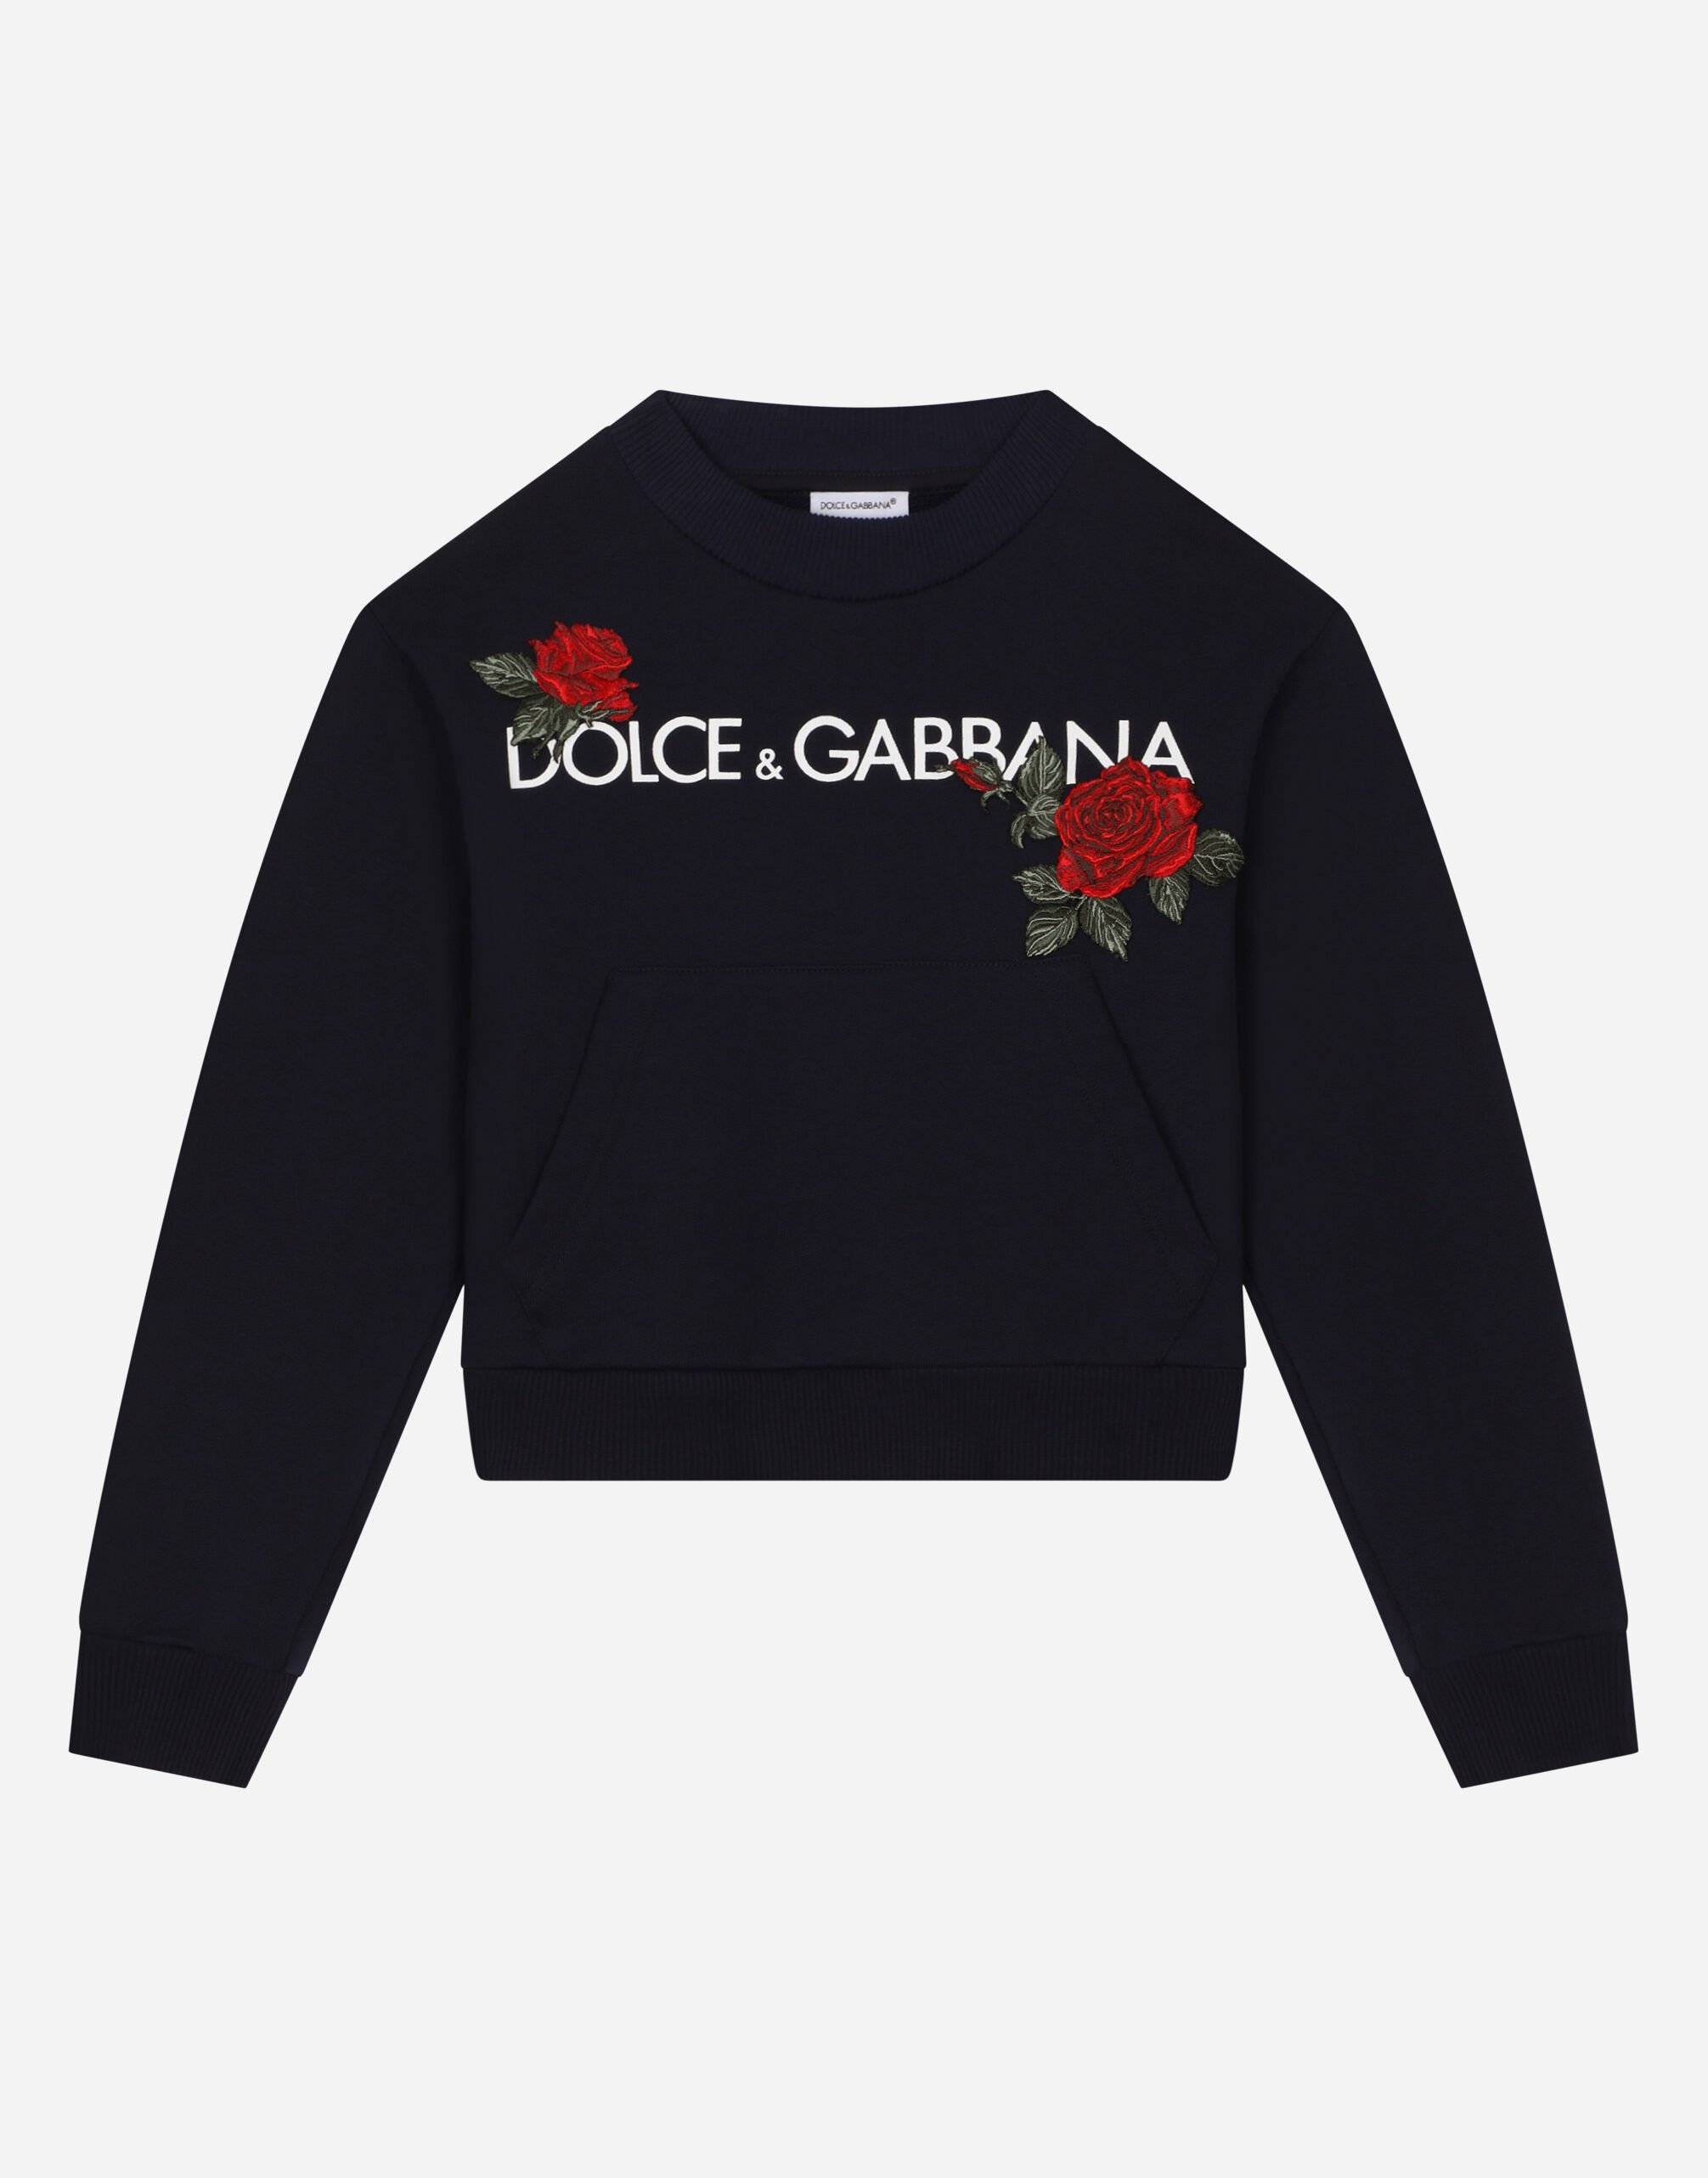 DolceGabbanaSpa Round-neck sweatshirt with logo print and rose patch White L55S82G7J7S